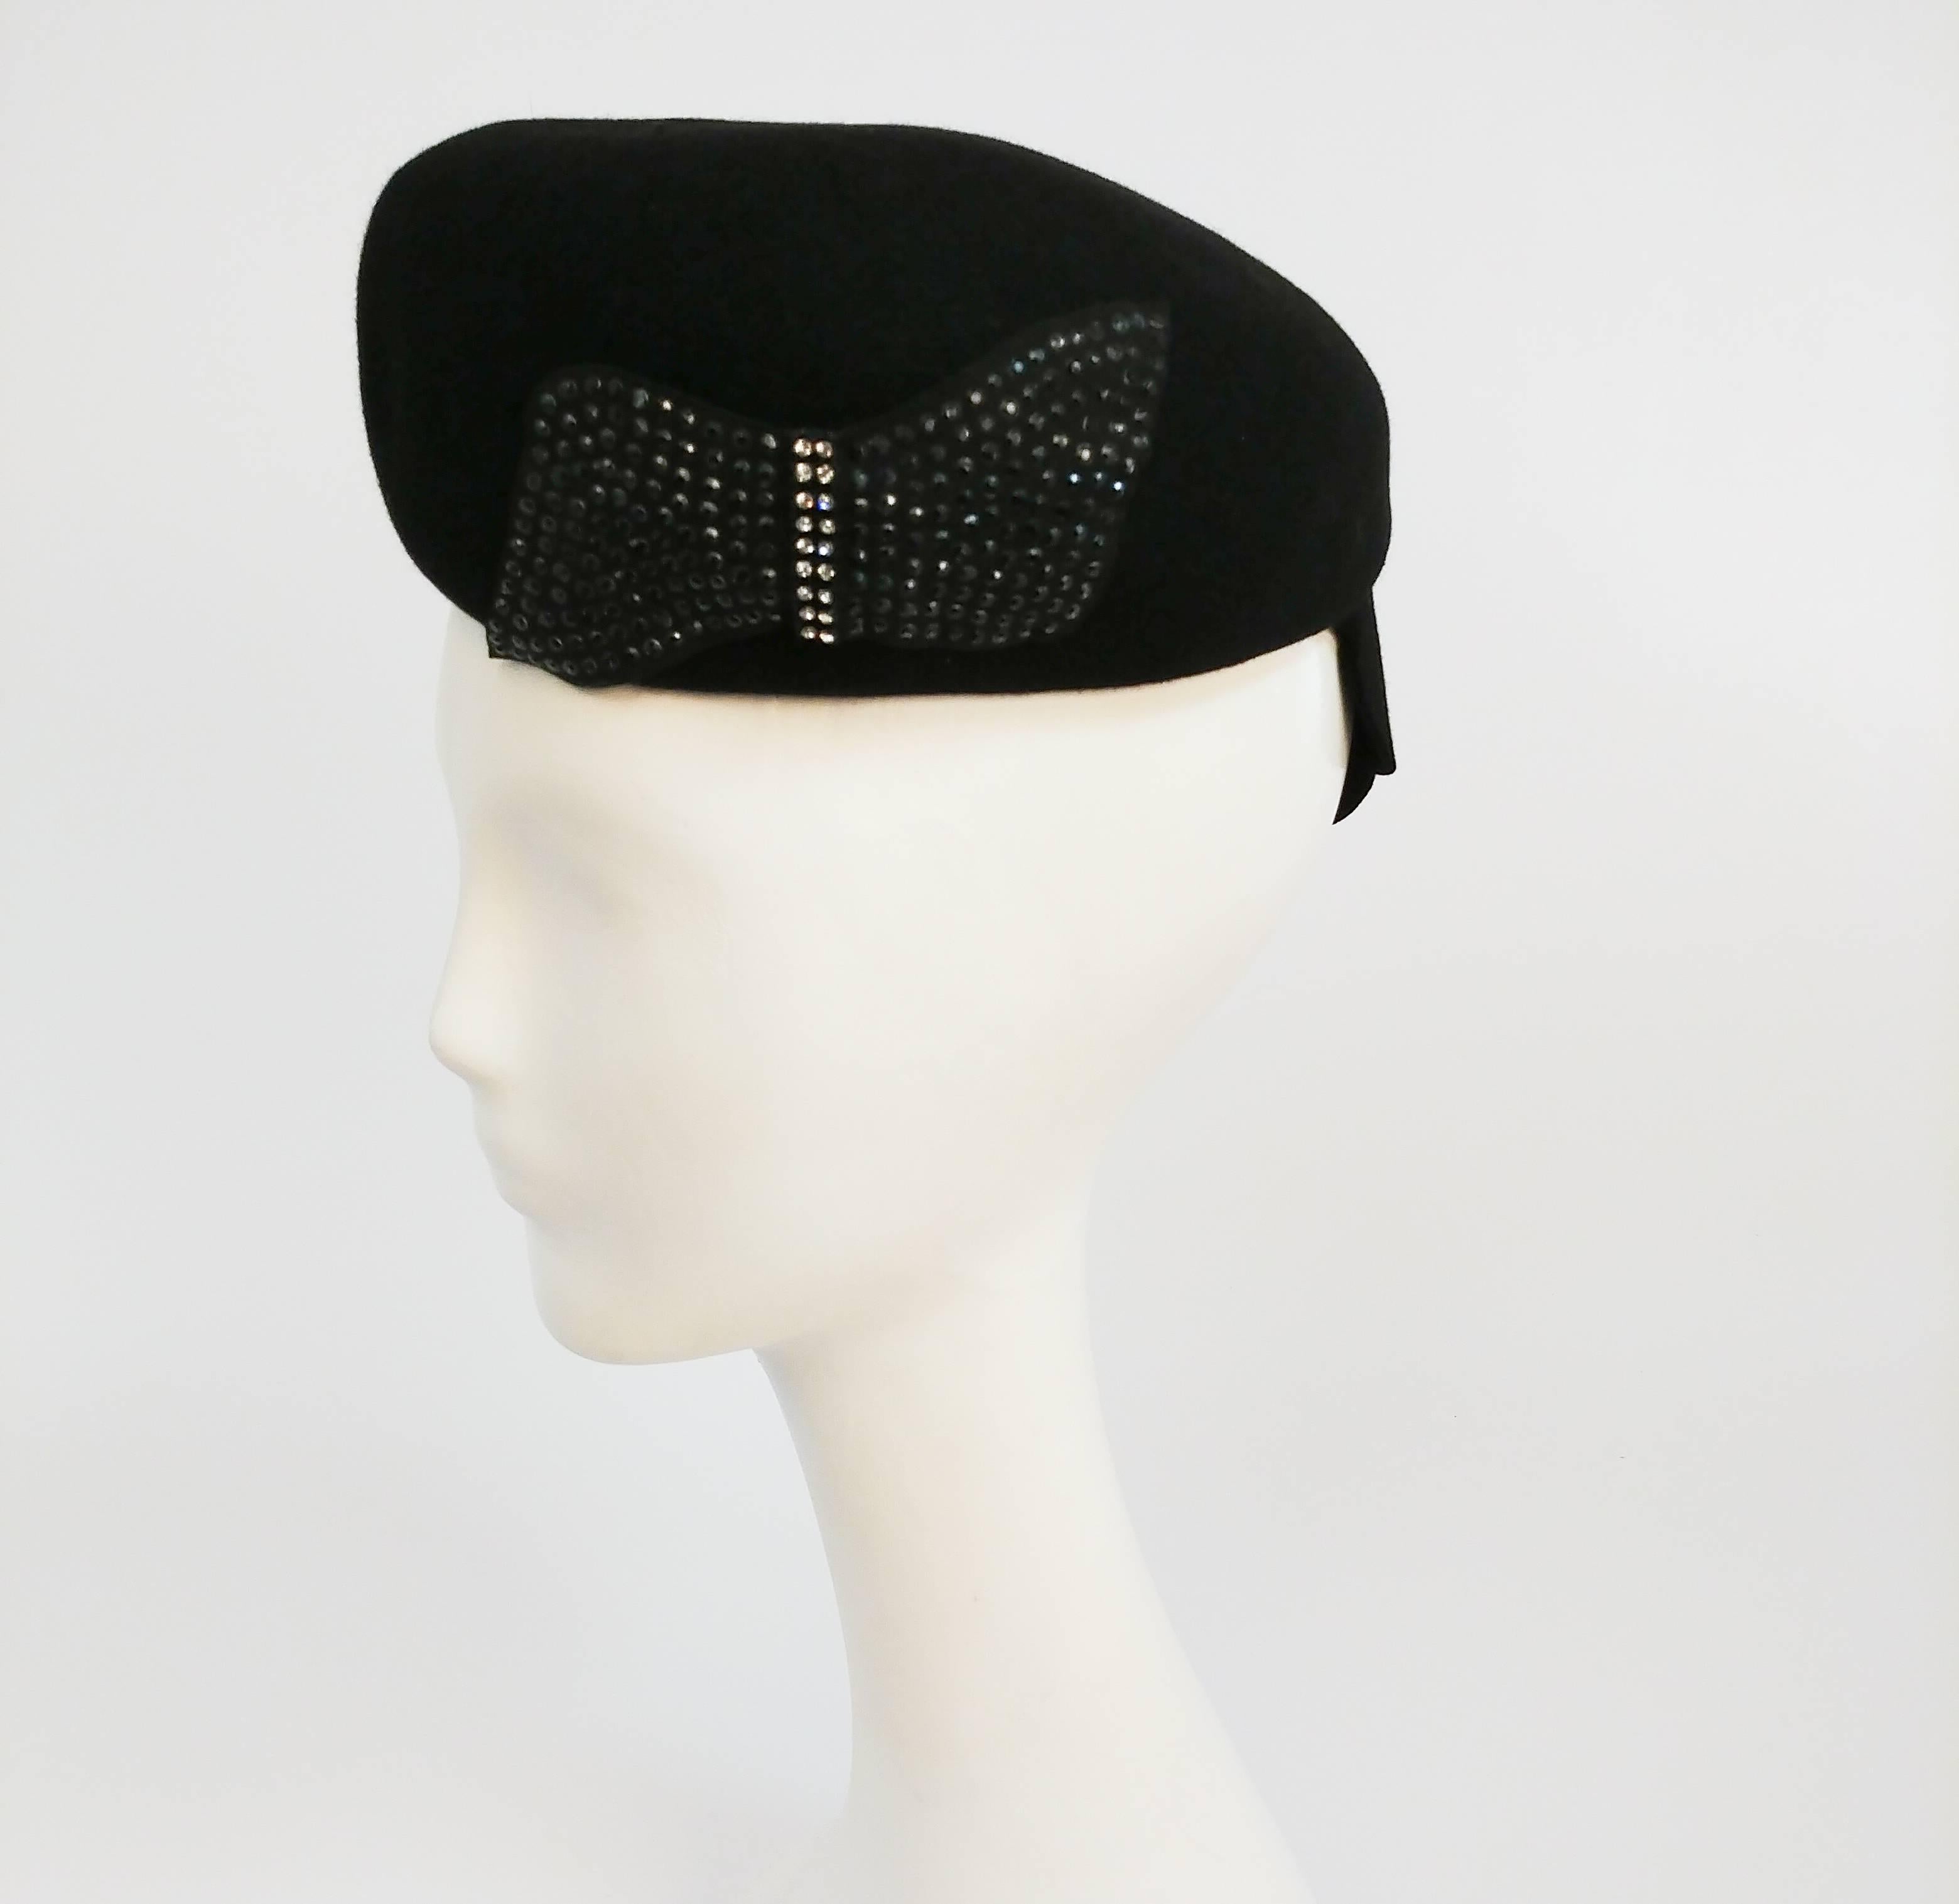 1930s Black Felt Hat with Side Bow. Interesting scalloped back conforms to back of head. 